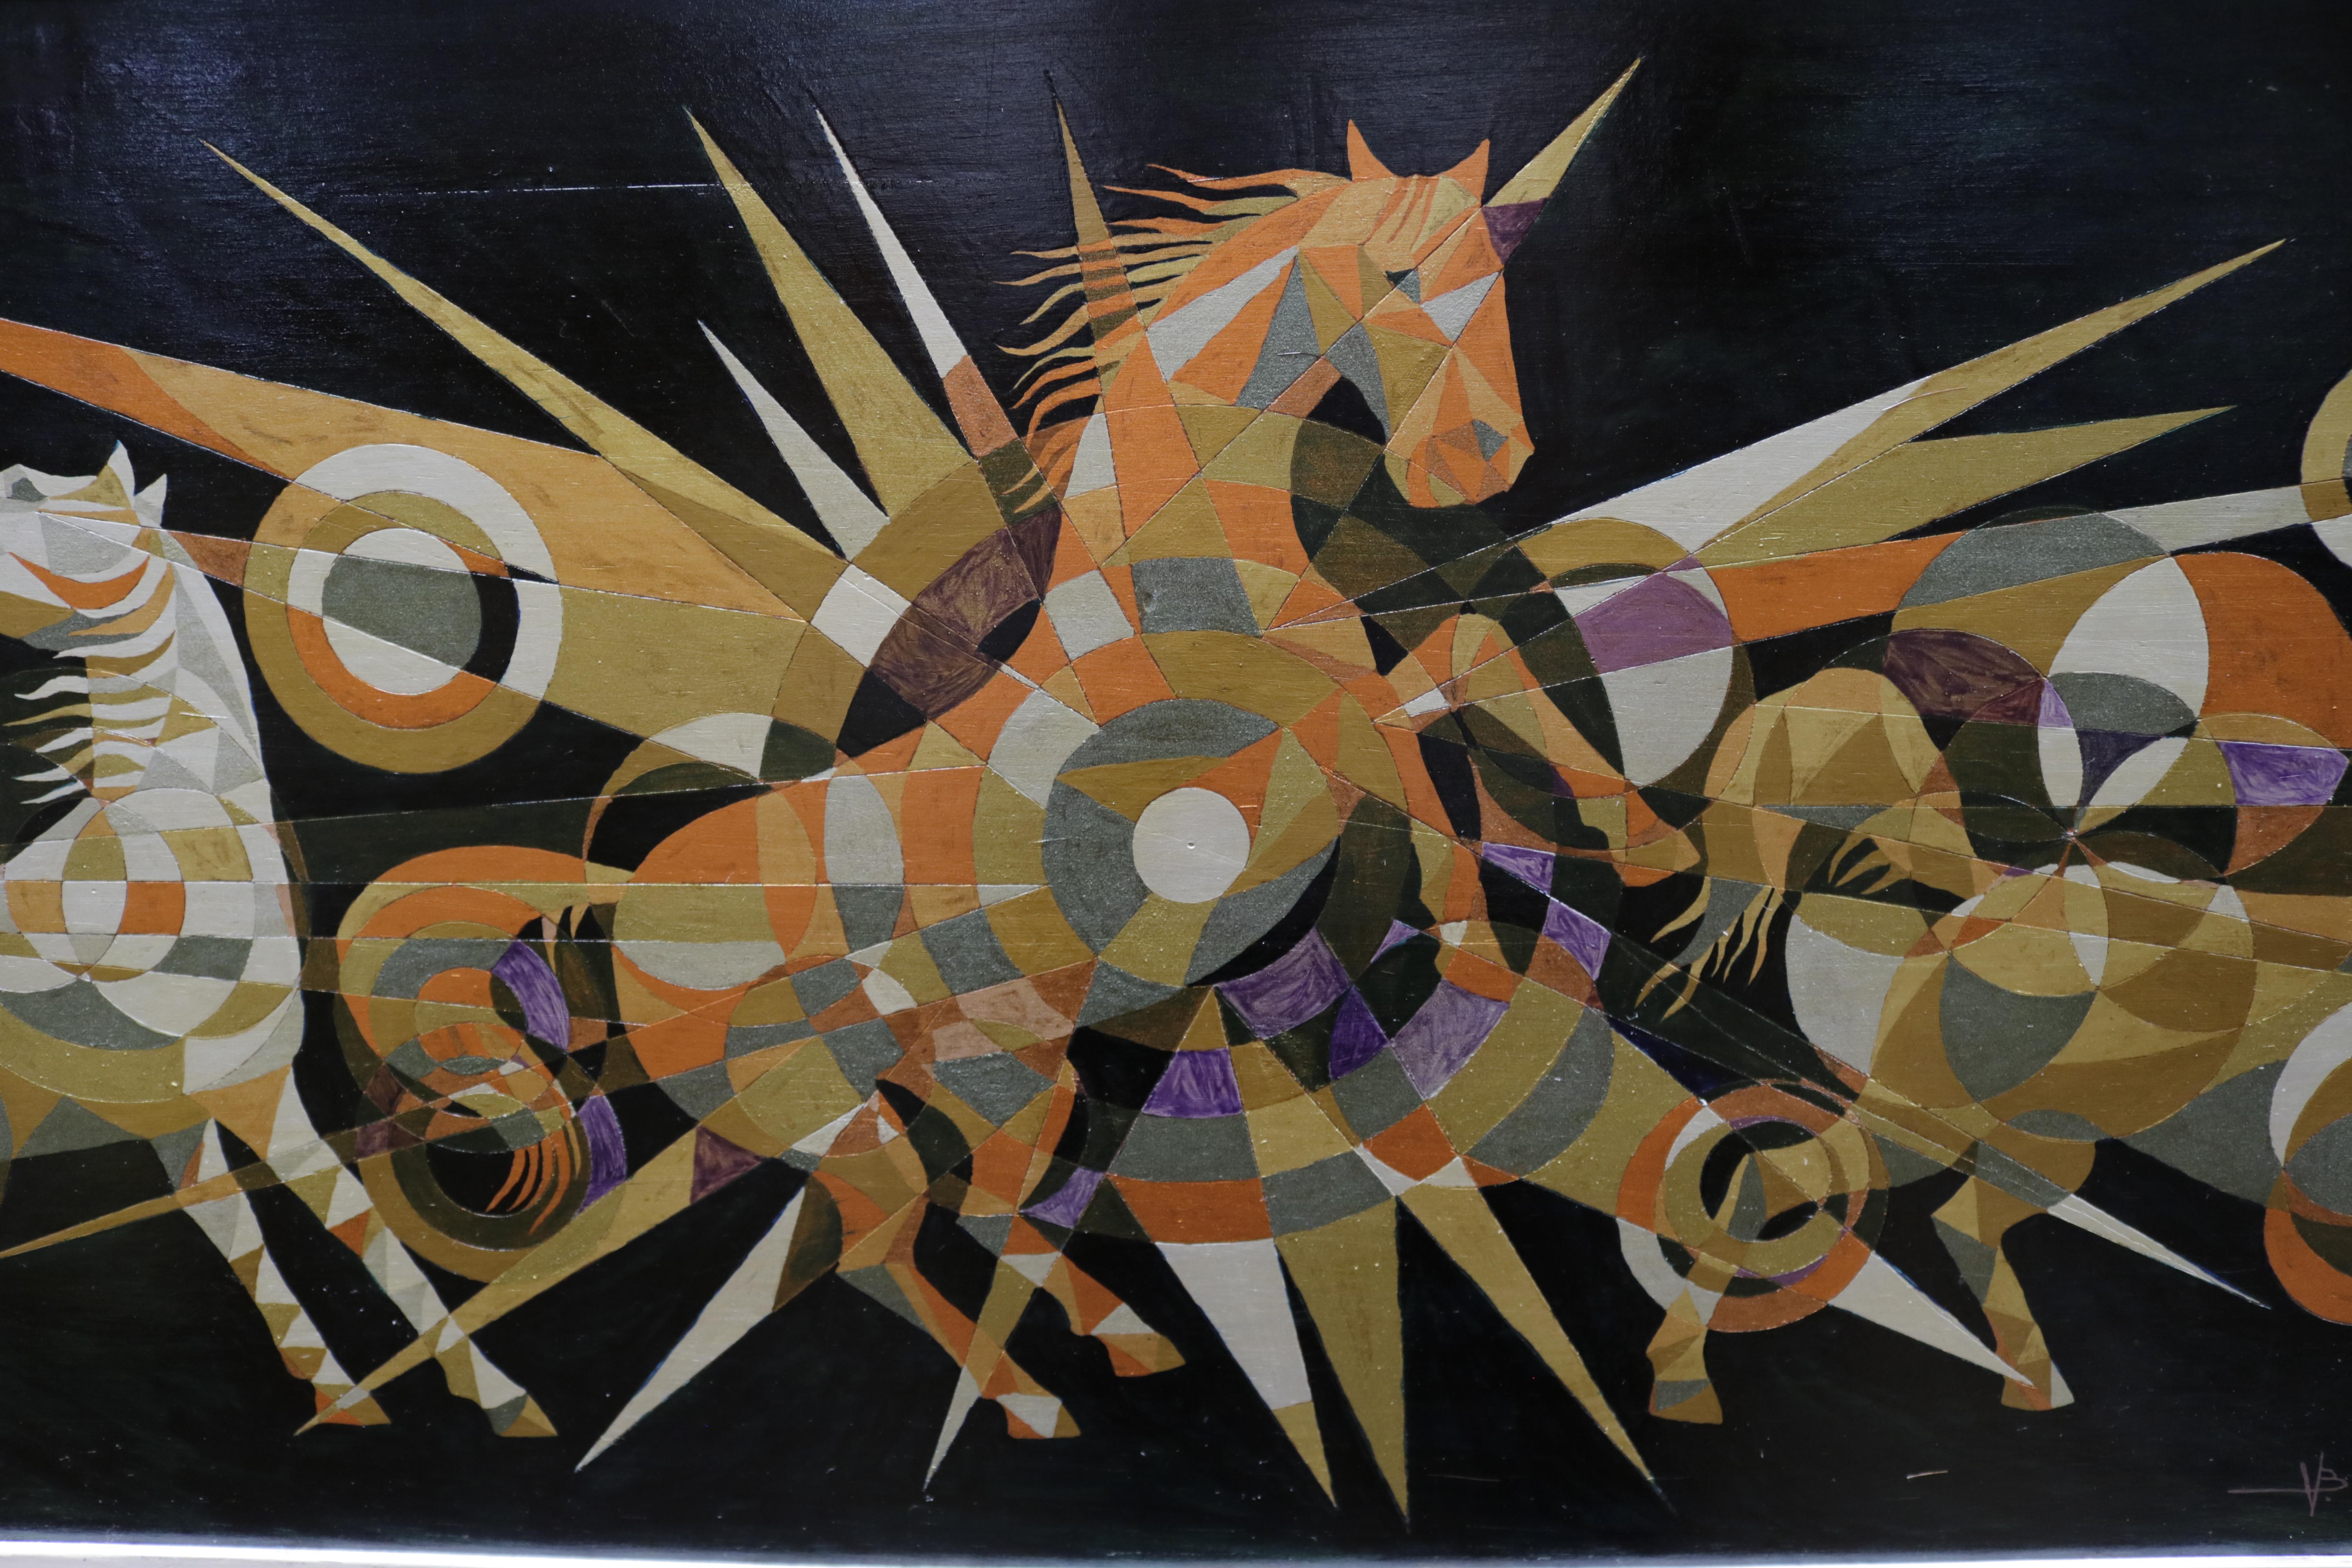 This boldly eclectic painting depicting horses in motion with kaleidoscope-like patterns can bring an interesting focal point to your space. Signed Badilla.
The artist etched first the wood then he painted the board.